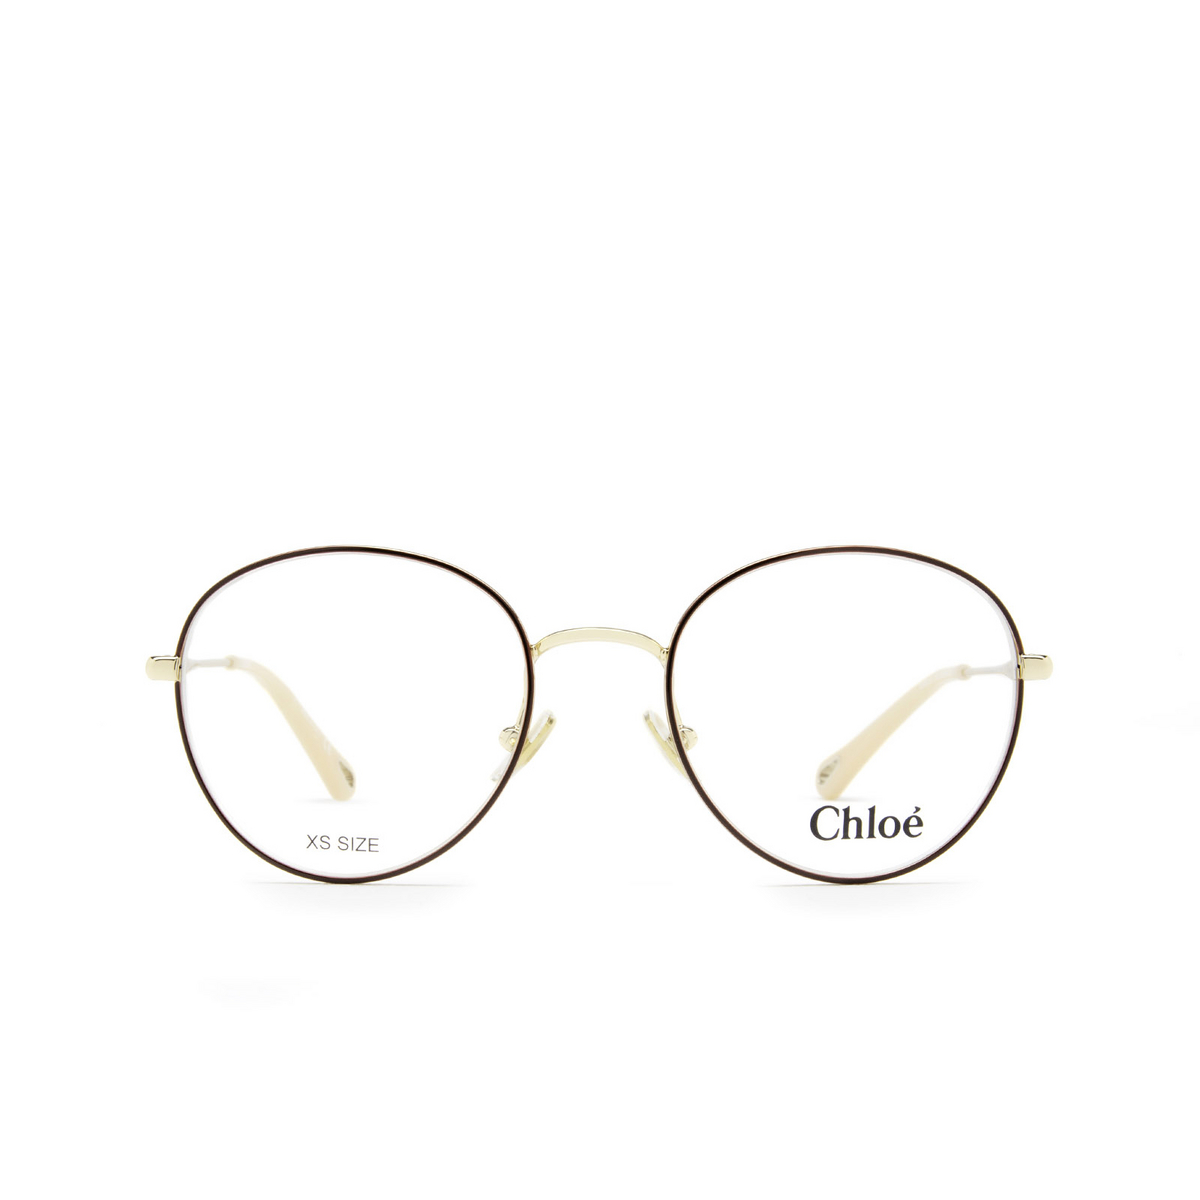 Chloé® Round Eyeglasses: CH0021O color 010 Gold & Burgundy - front view